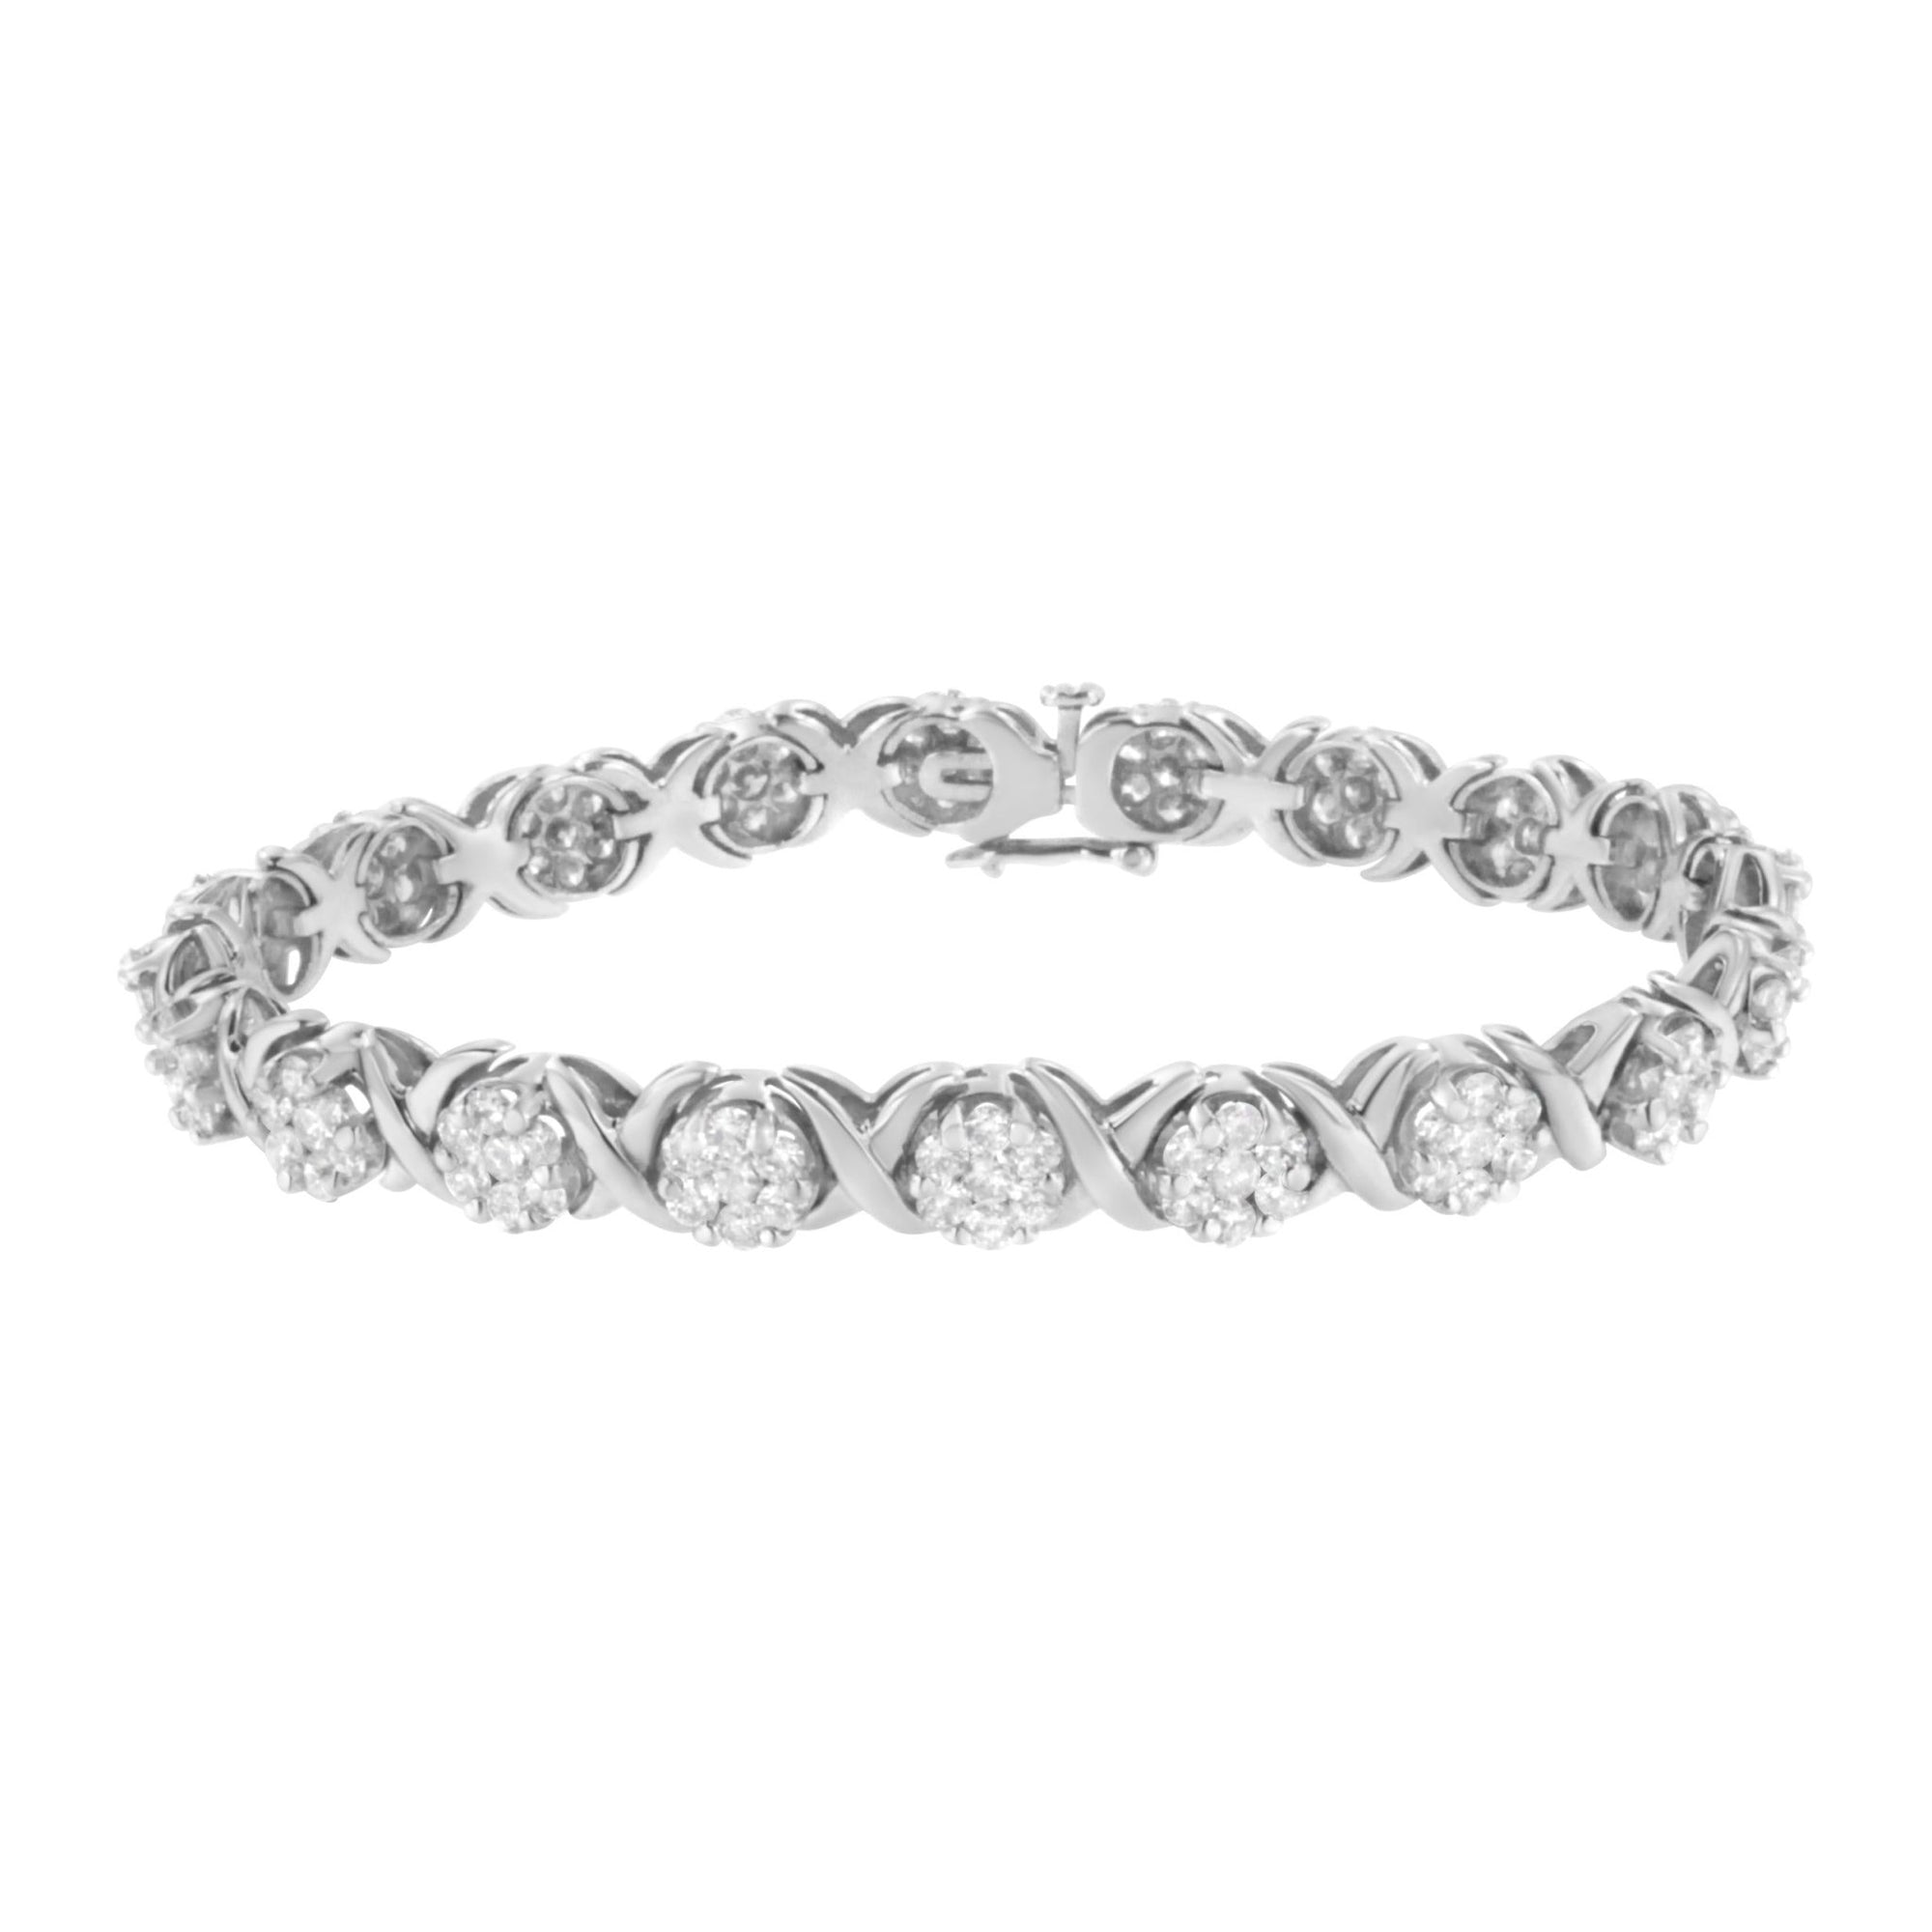 14K White Gold 6-1/3 Cttw Round Brilliant-Cut Diamond Round Cluster & X-Link 7" Tennis Bracelet (I-J Color, SI2-I1 Clarity) - LinkagejewelrydesignLinkagejewelrydesign